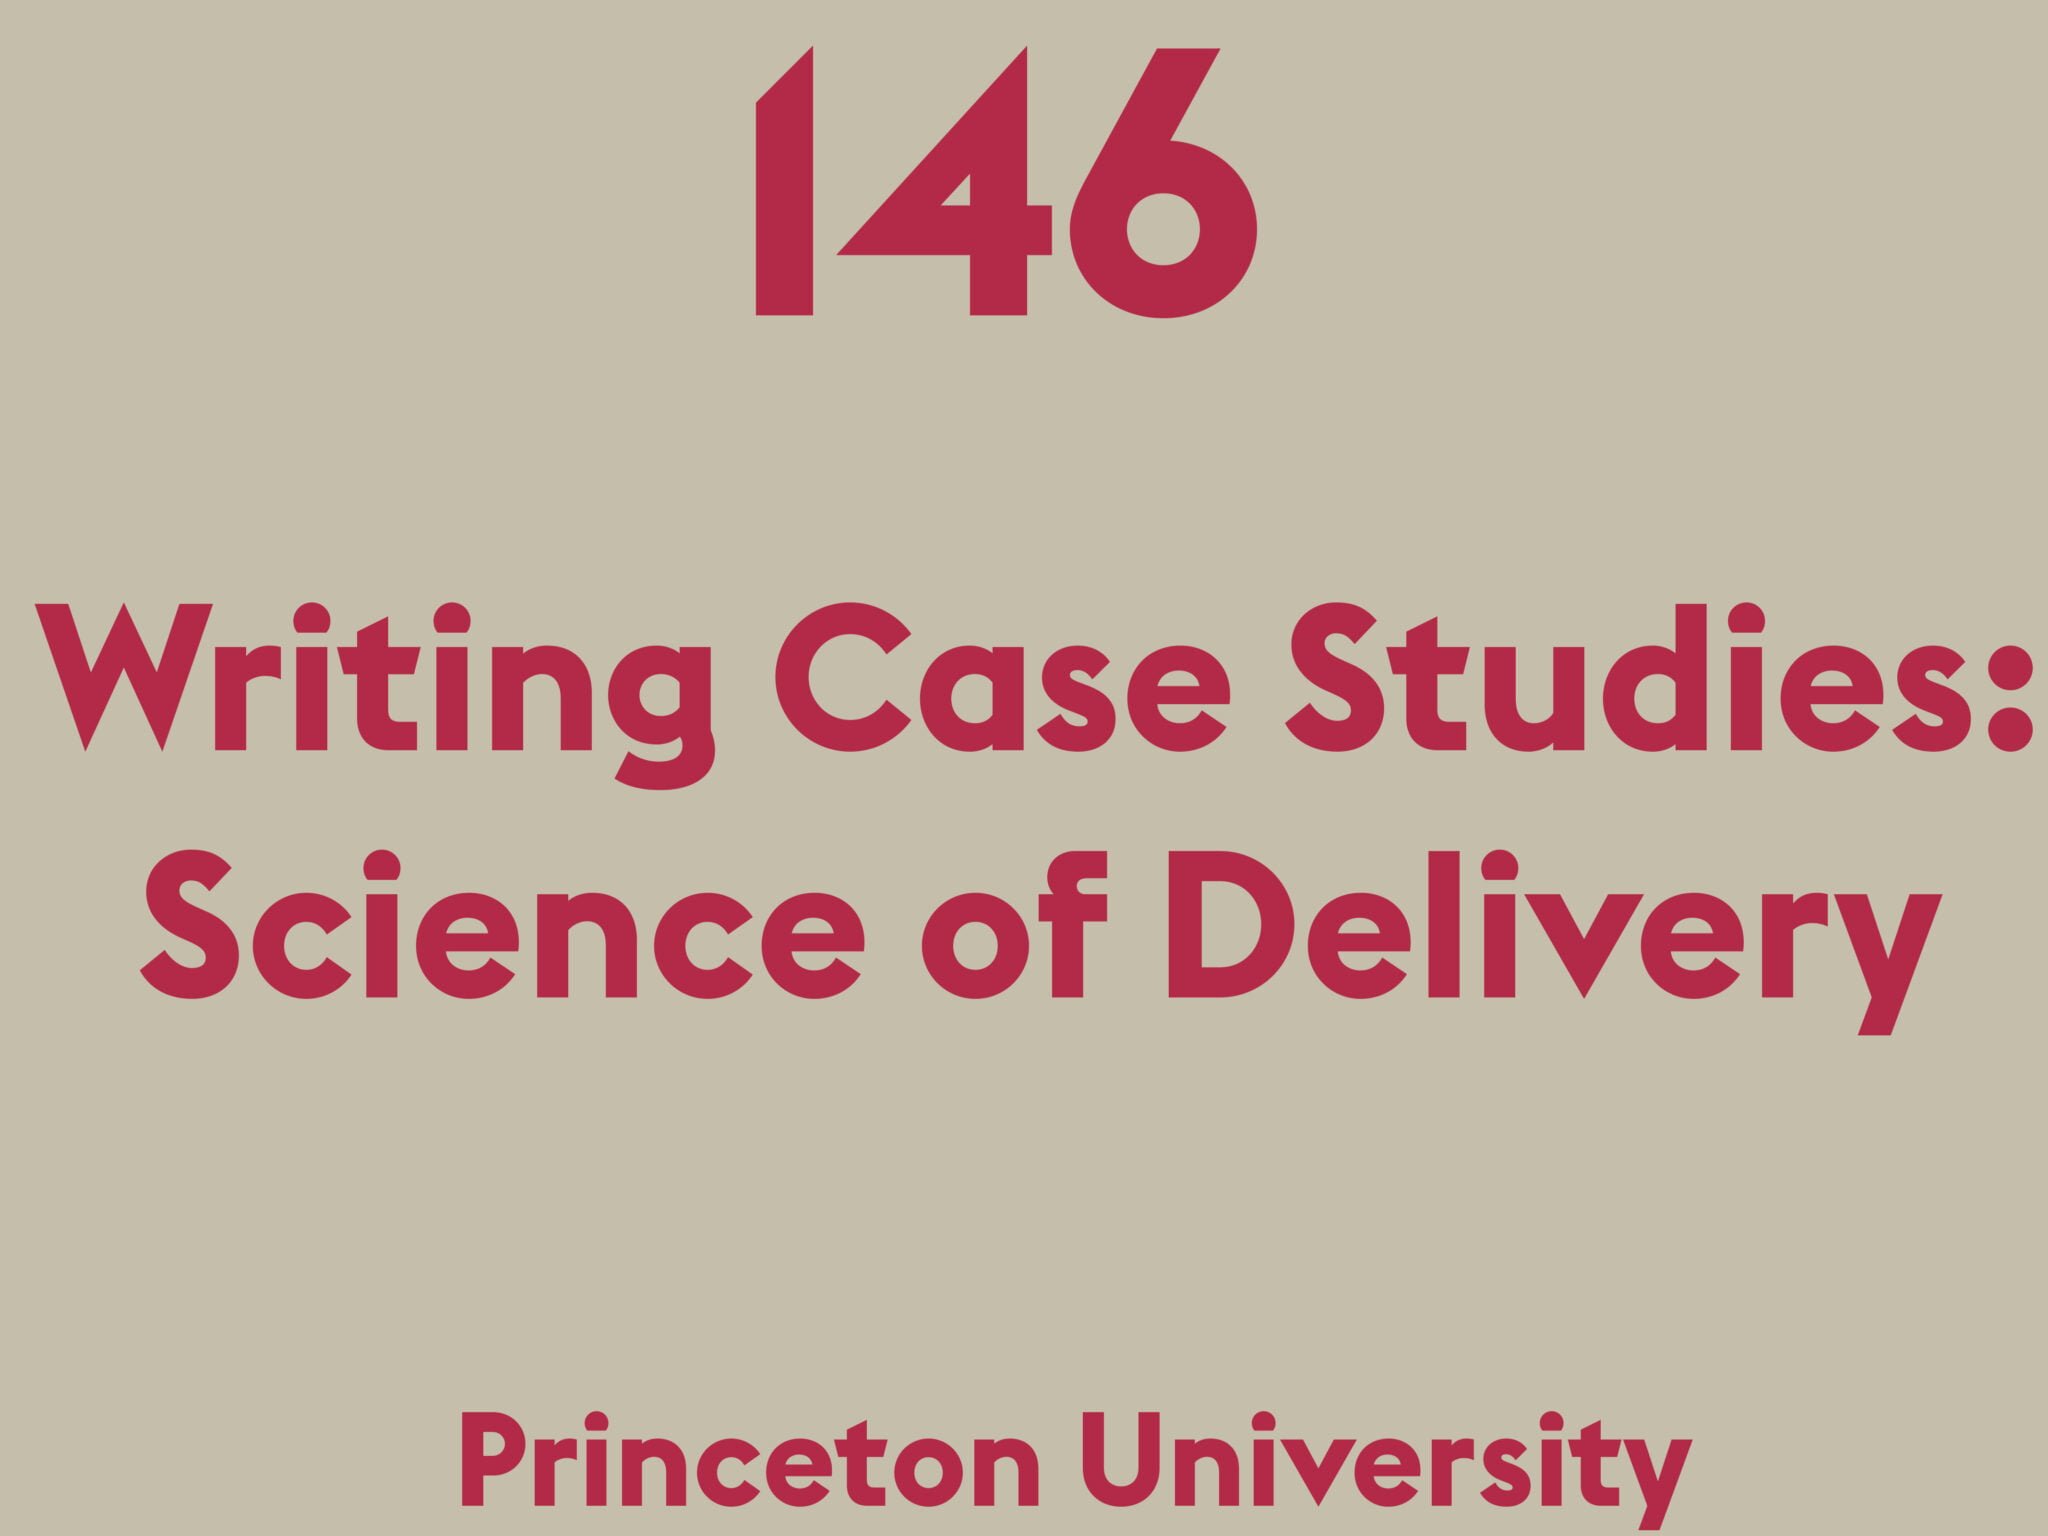 Writing Case Studies: Science of Delivery